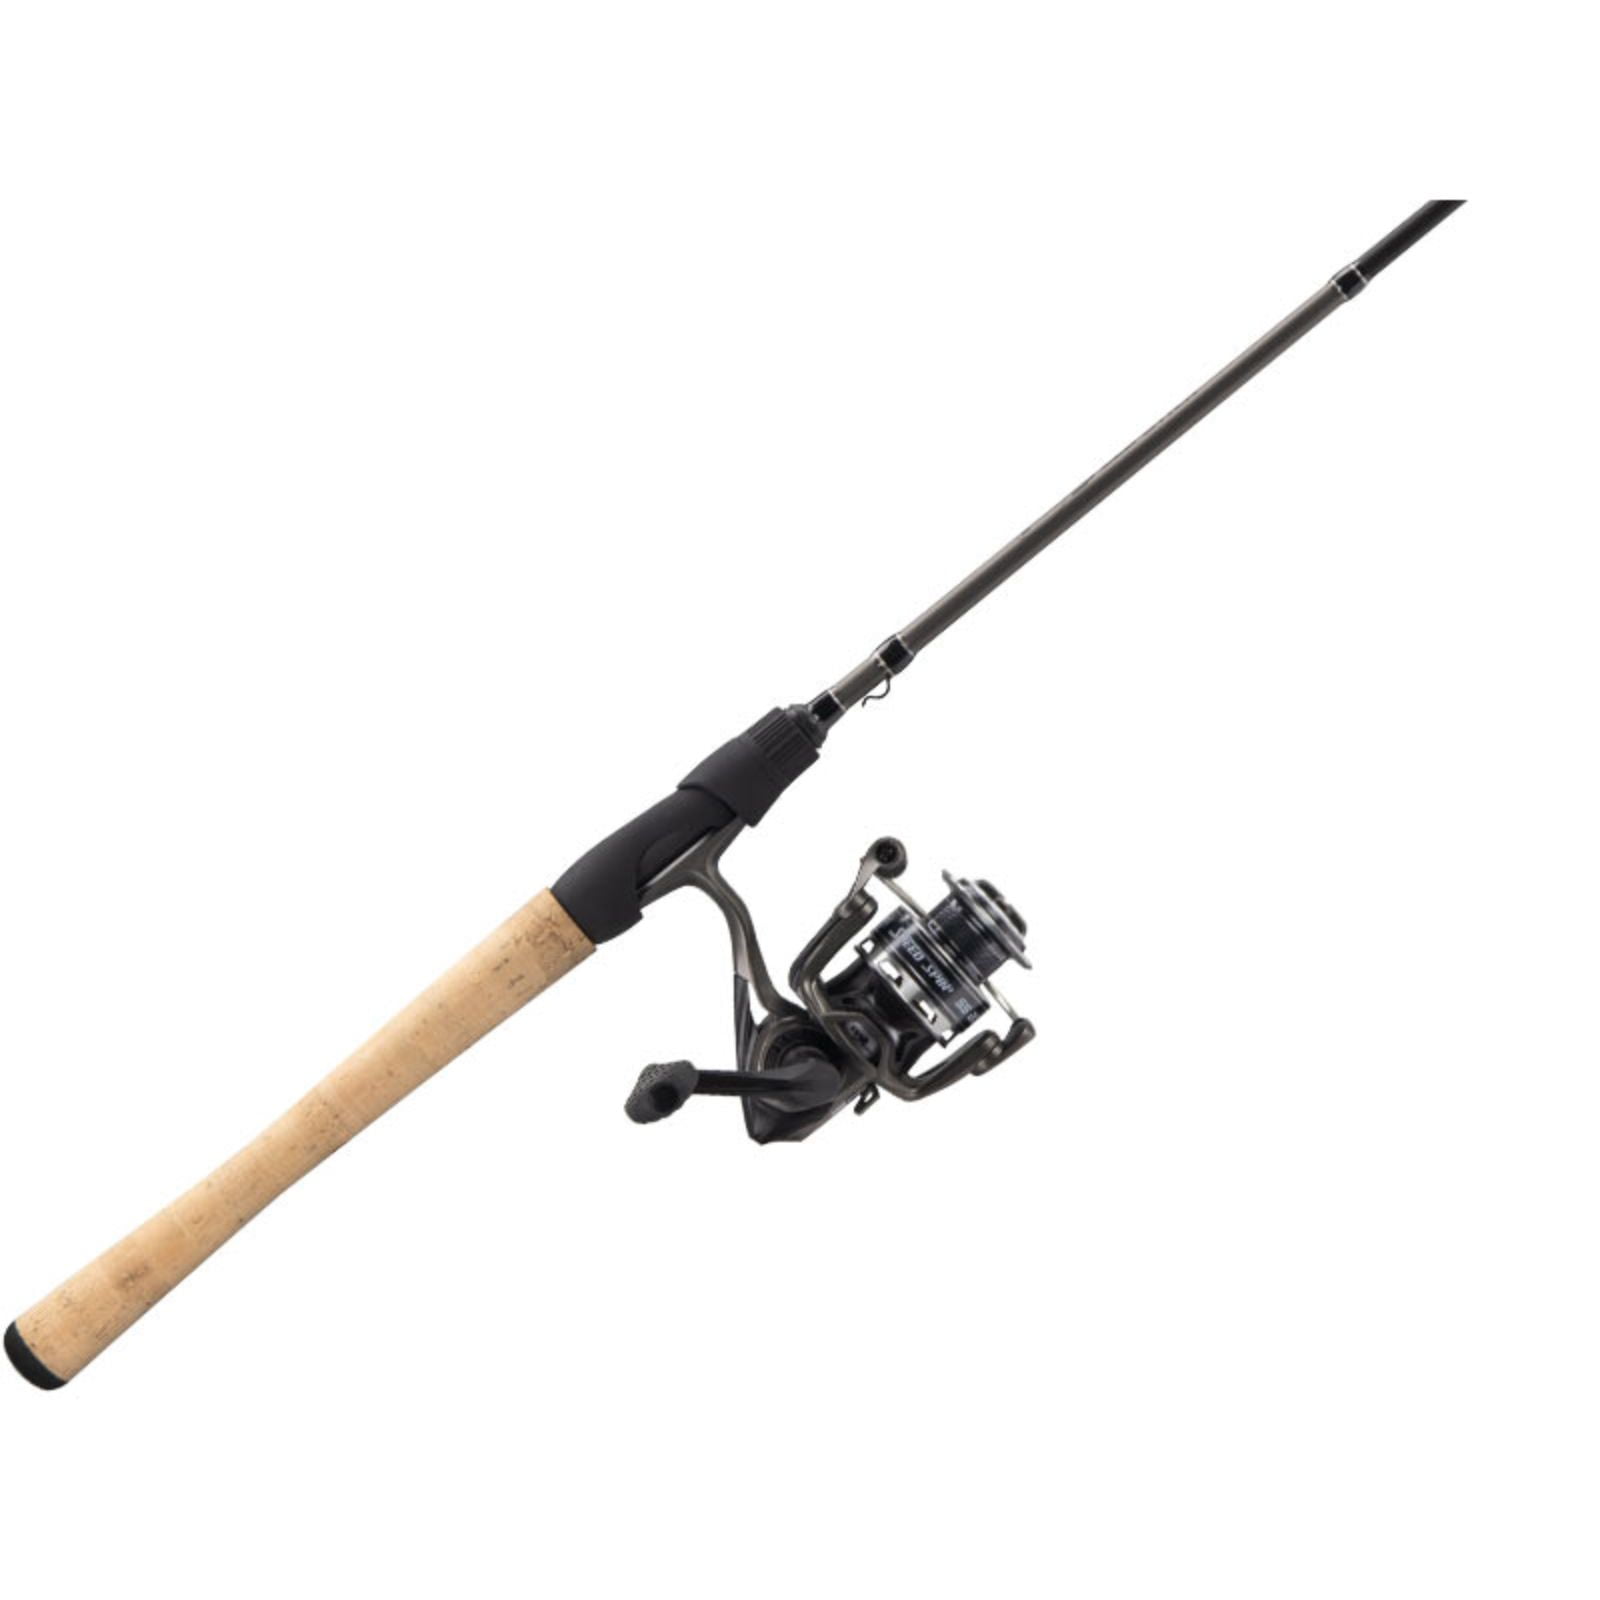 Lew's Speed Spin High Speed Spinning Reel and Fishing Rod Combo, 6-Foot  6-Inch Rod, Size 30 Reel, Black 